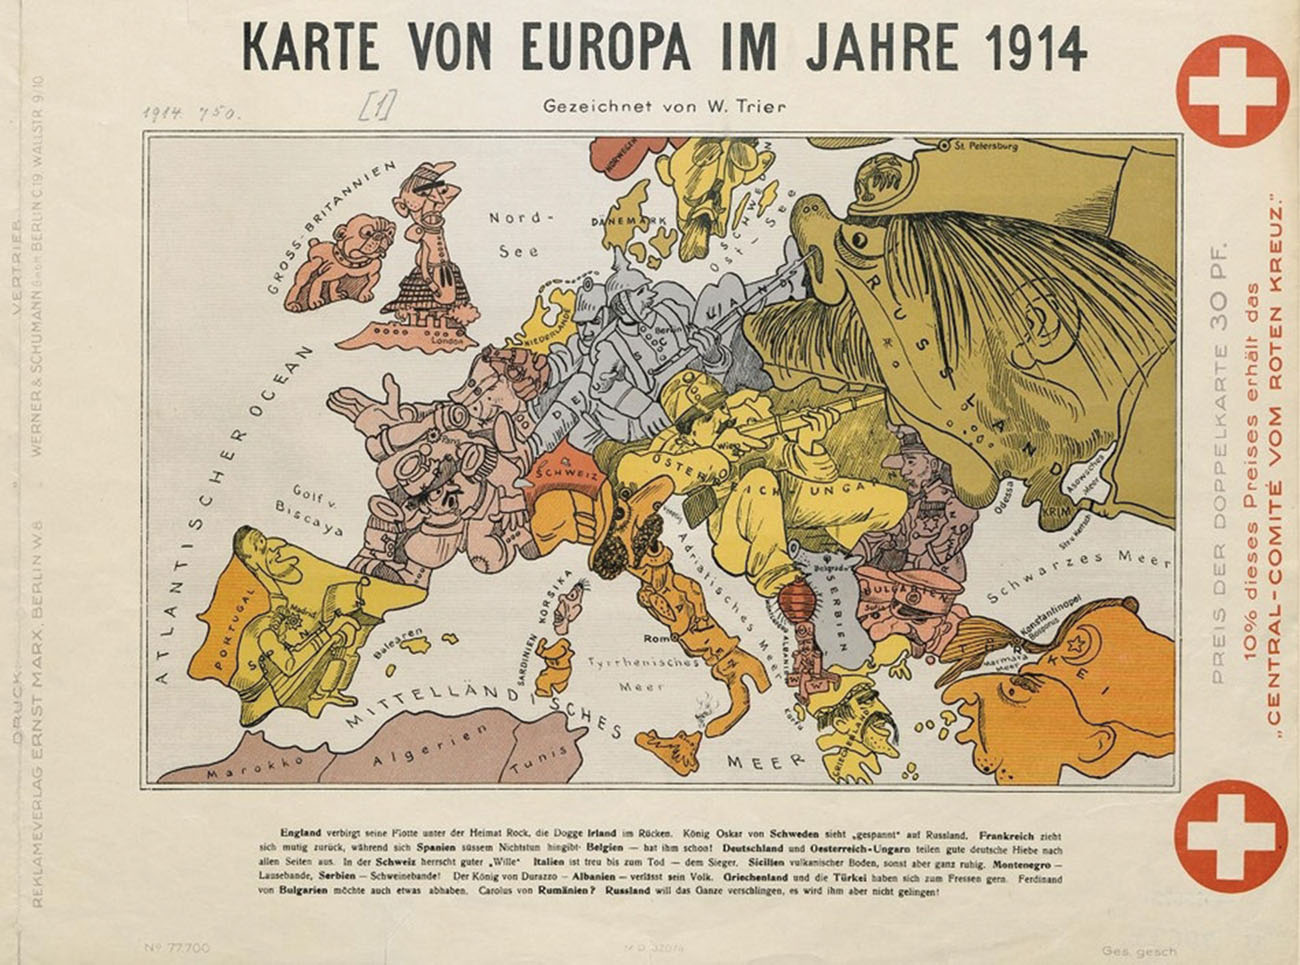 This is satirical map of Europe in 1914. Each nation is shown in a different color and is decorated with cartoon style drawings of people and animals representing each nation. Germany includes two soldiers. One soldier has a gun pointed at Russia’s nose. His foot also pushes Russia’s nose. The other soldier faces the other way and his gun and foot are in France. Austria-Hungary is a soldier with a gun pointed toward Russia. Other countries look on at the encounter. Text, in German, is written on the margins of the map.